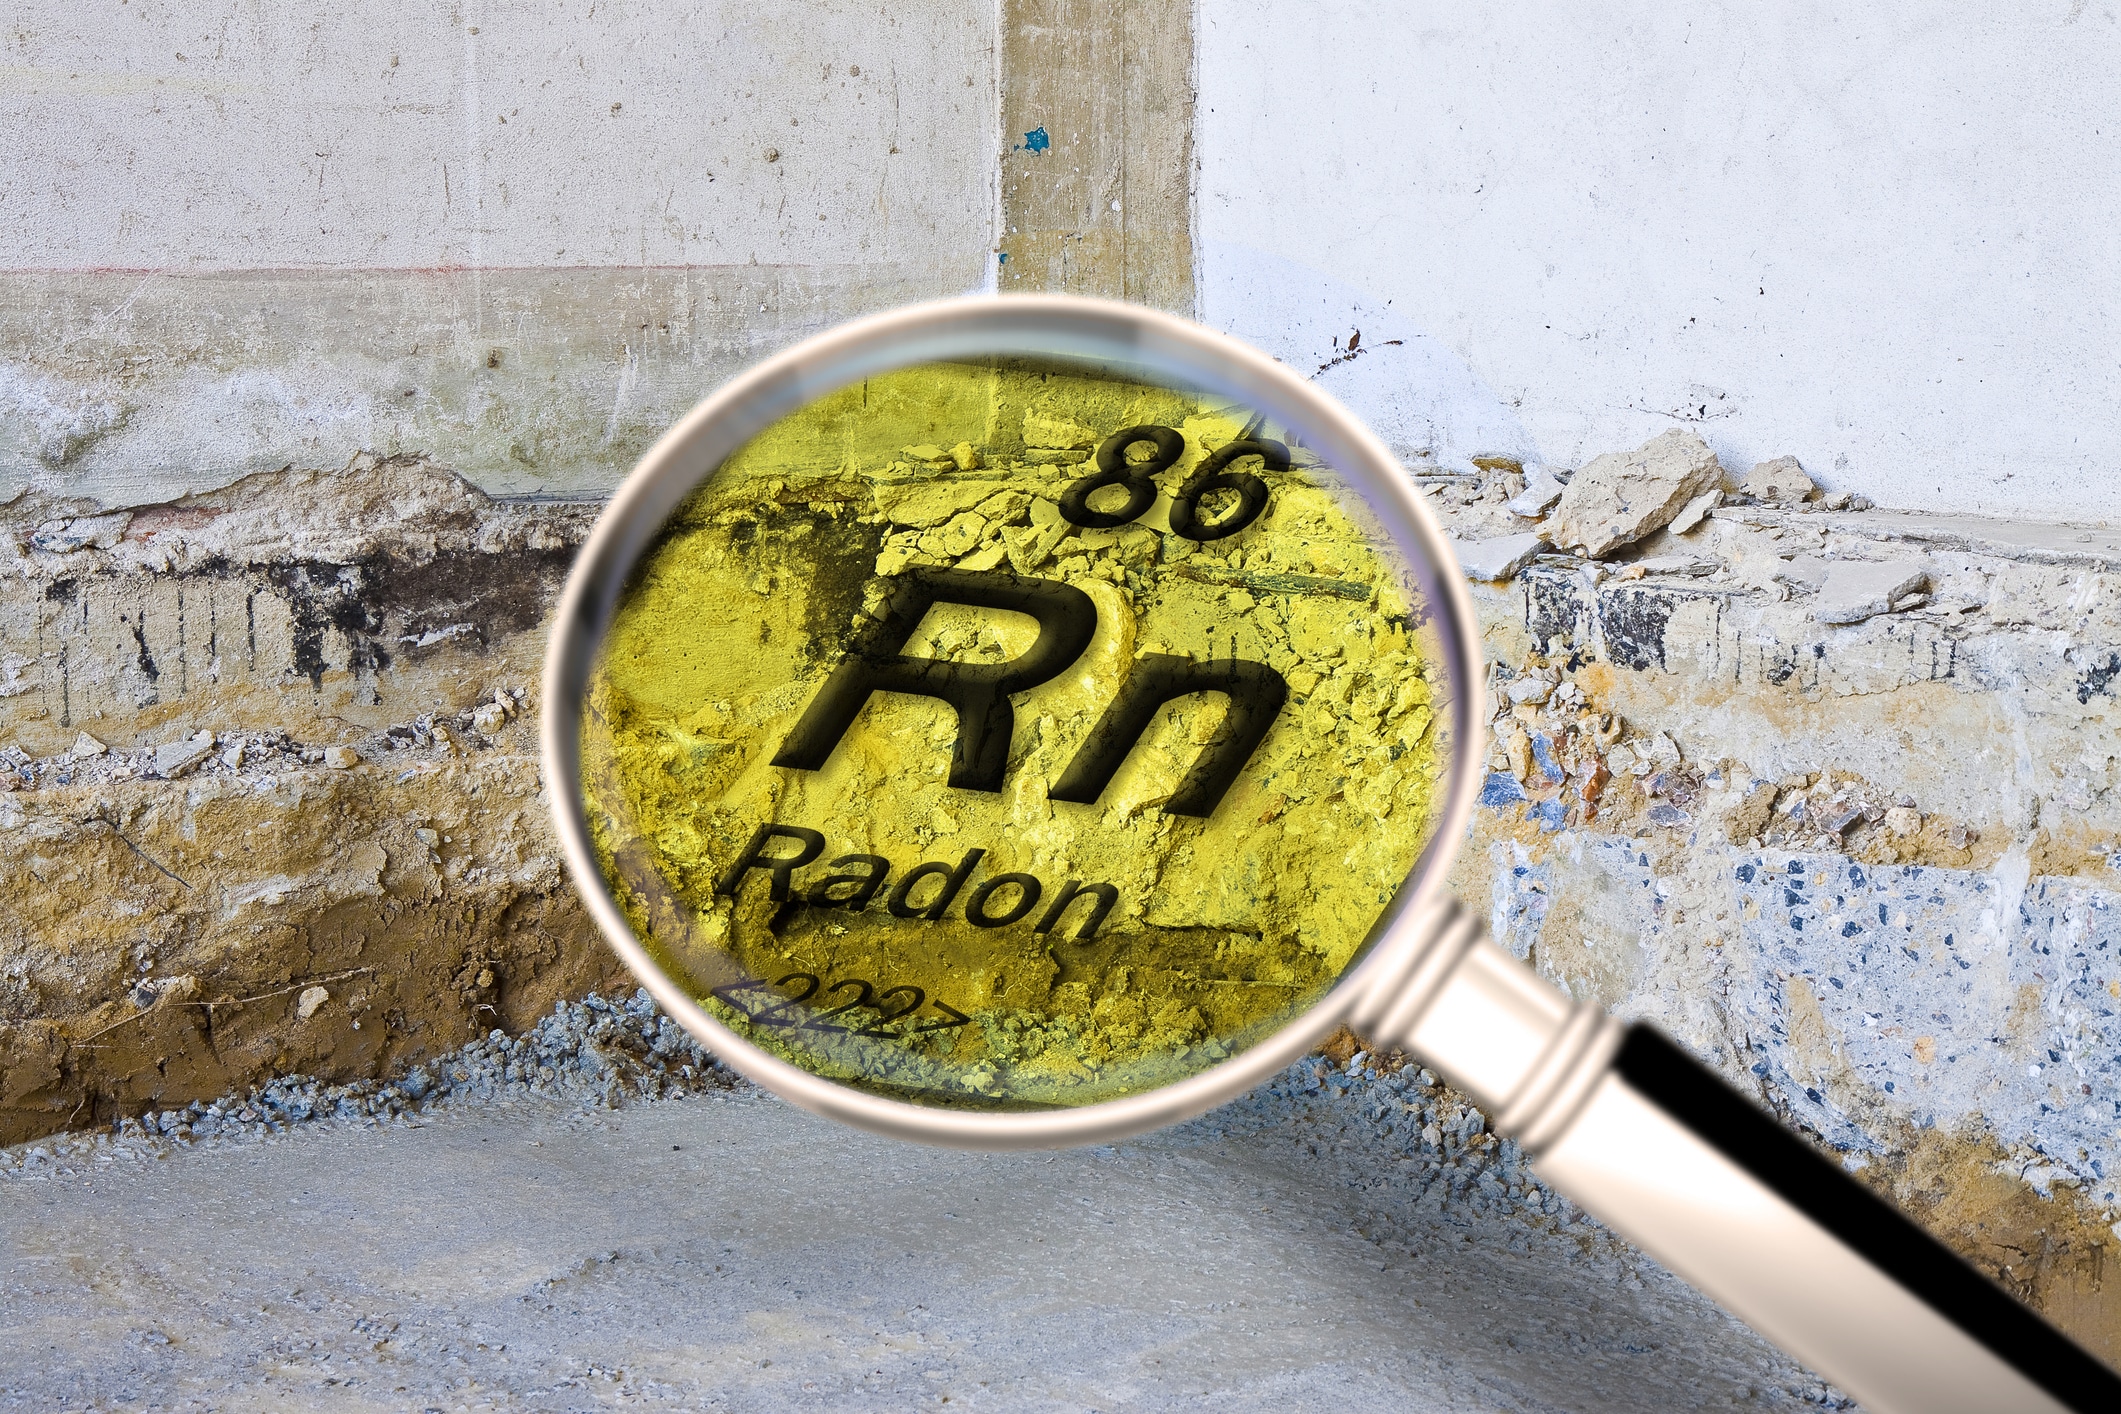 radon testing is an important safety precaution for your home or business